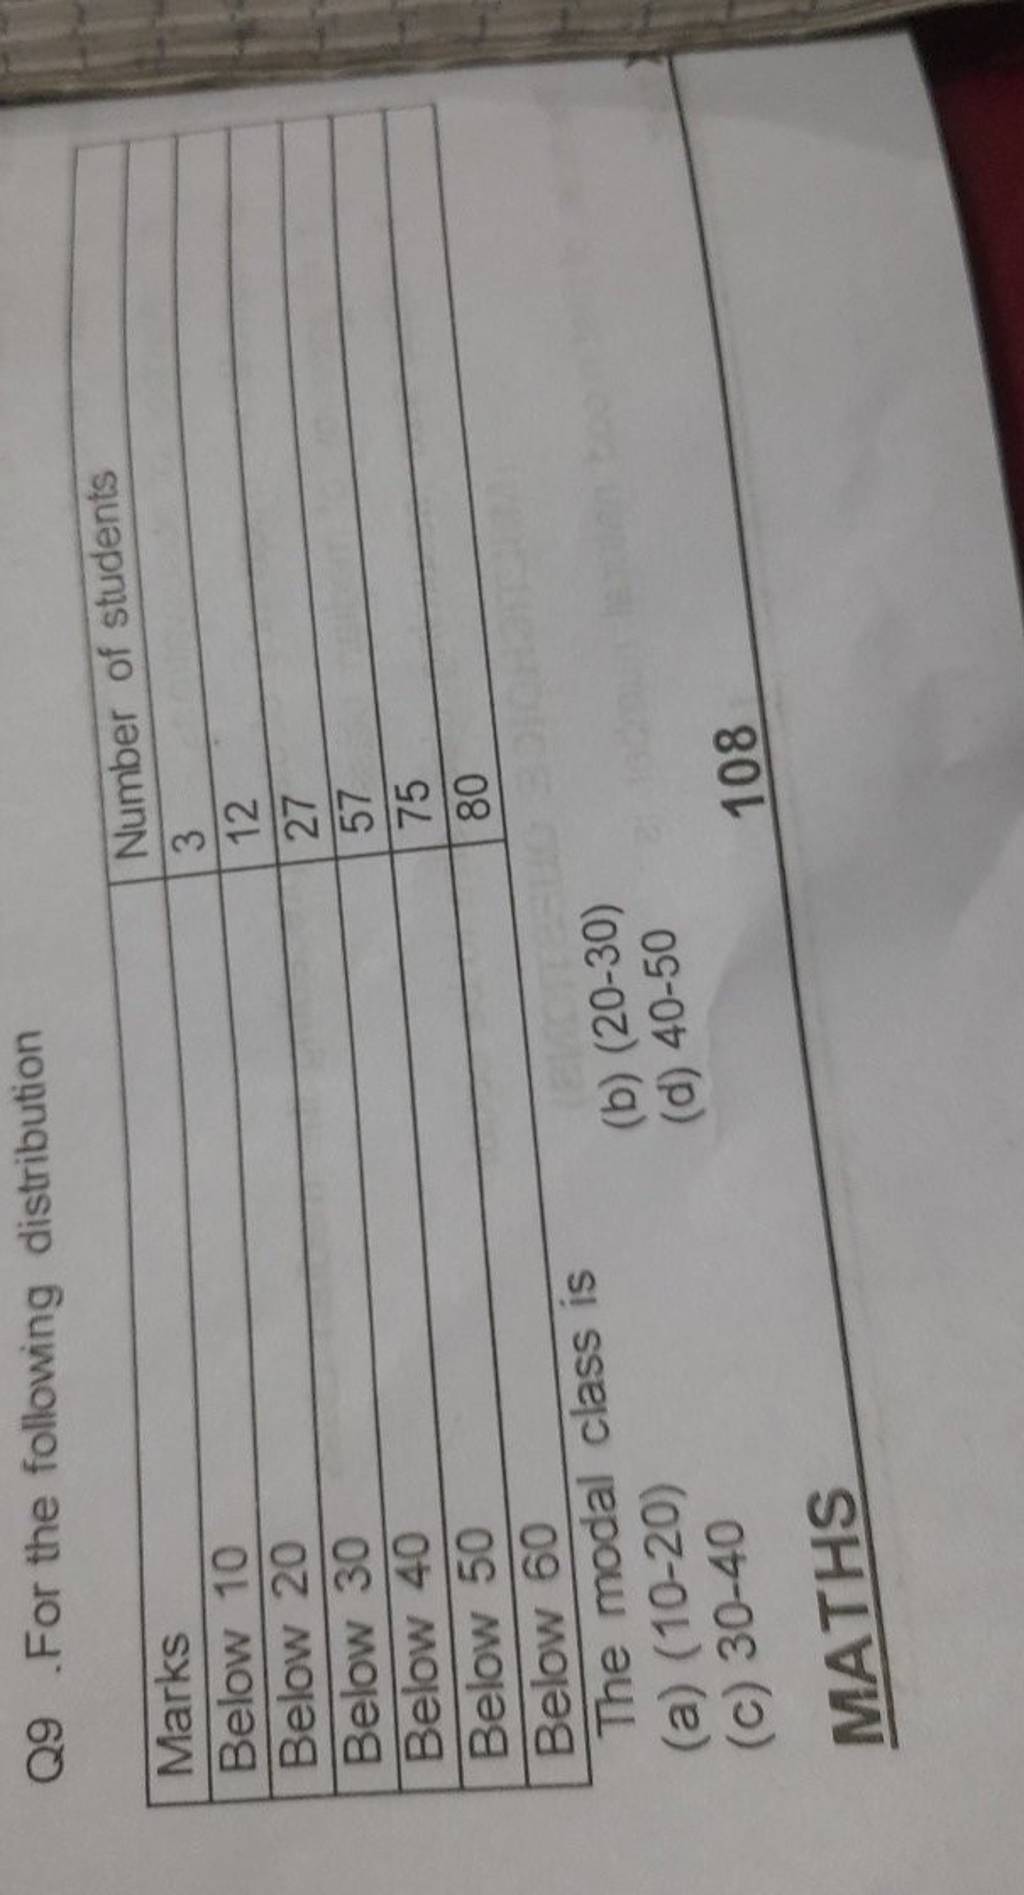 Q9.For the following distribution
MarksNumber of studentsBelow 103Belo